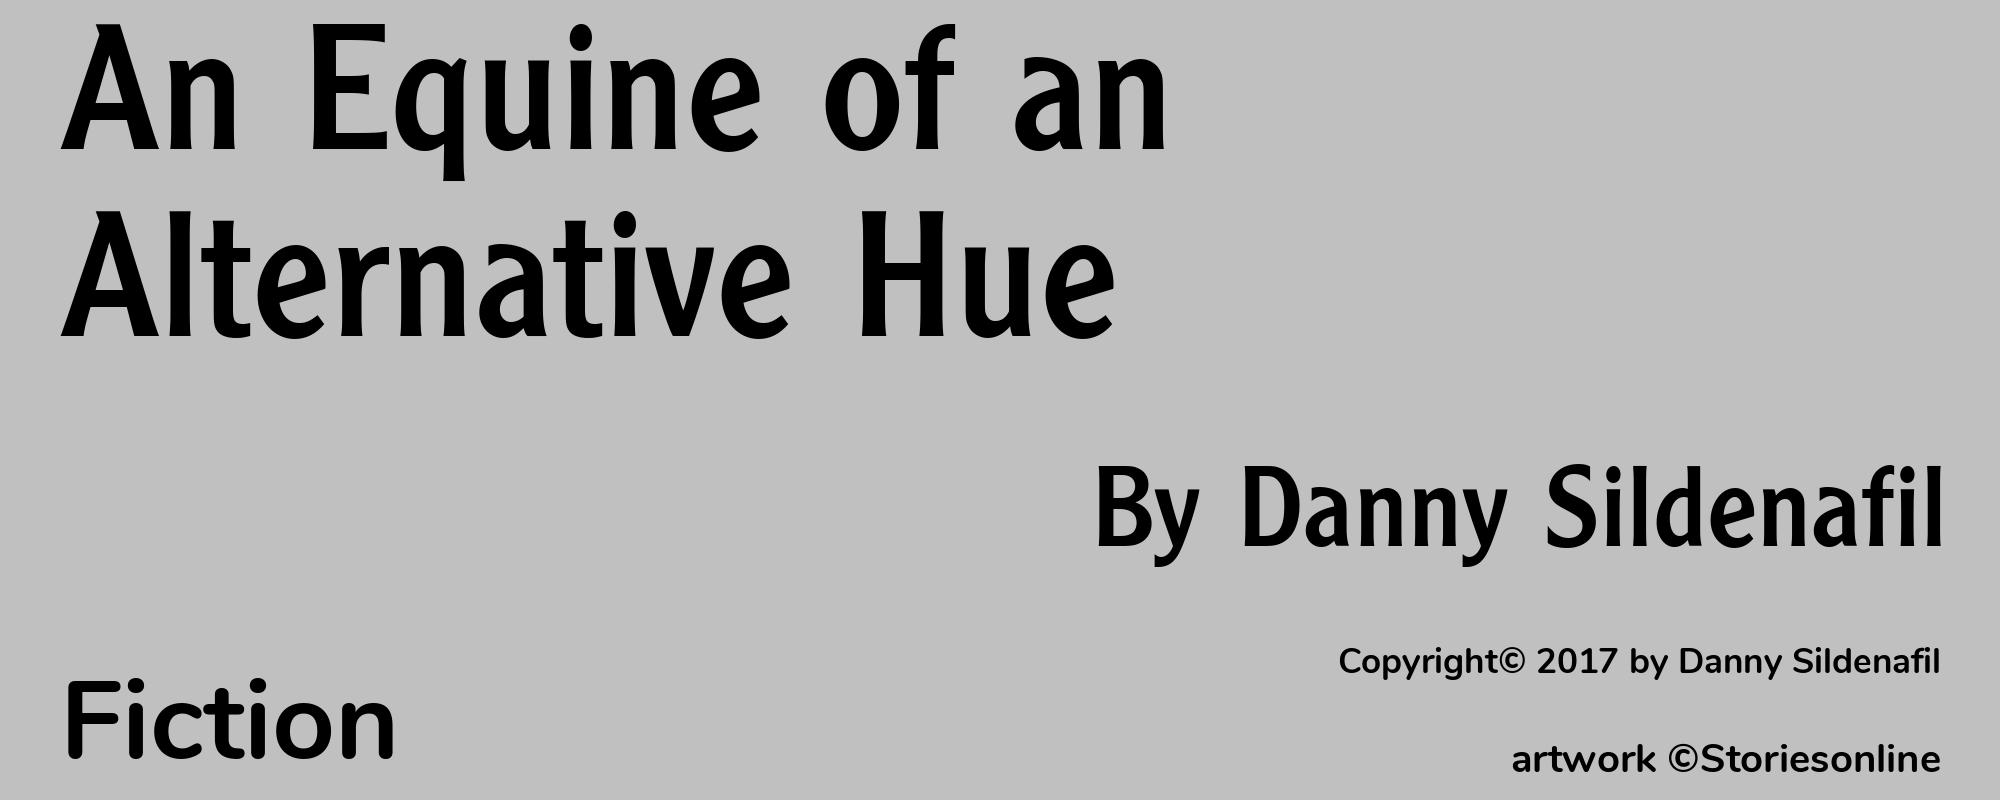 An Equine of an Alternative Hue - Cover